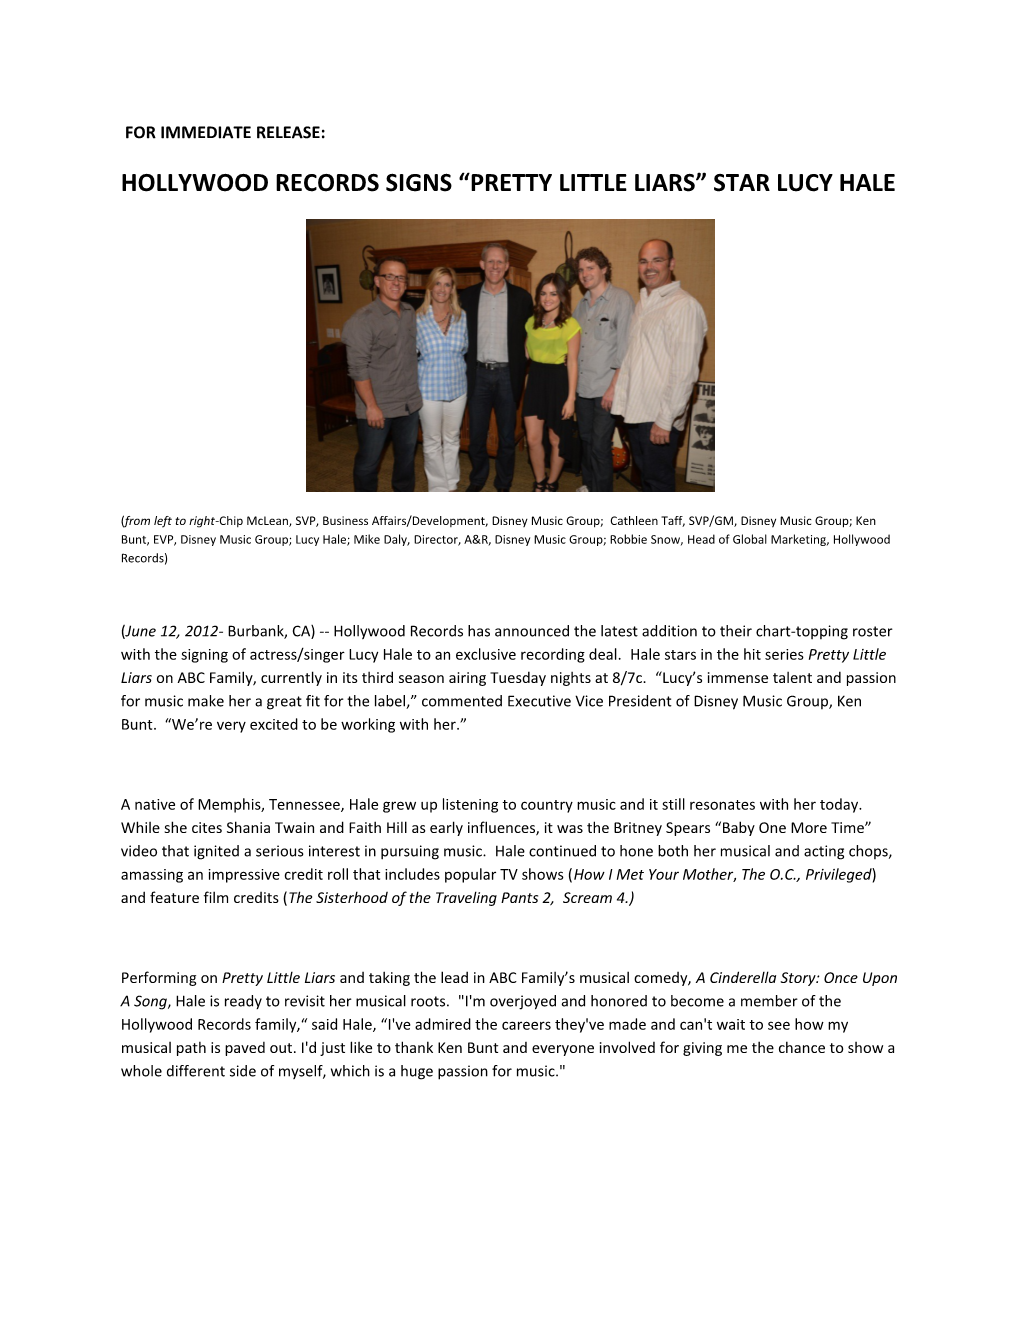 Hollywood Records Signs Pretty Little Liars Star Lucy Hale